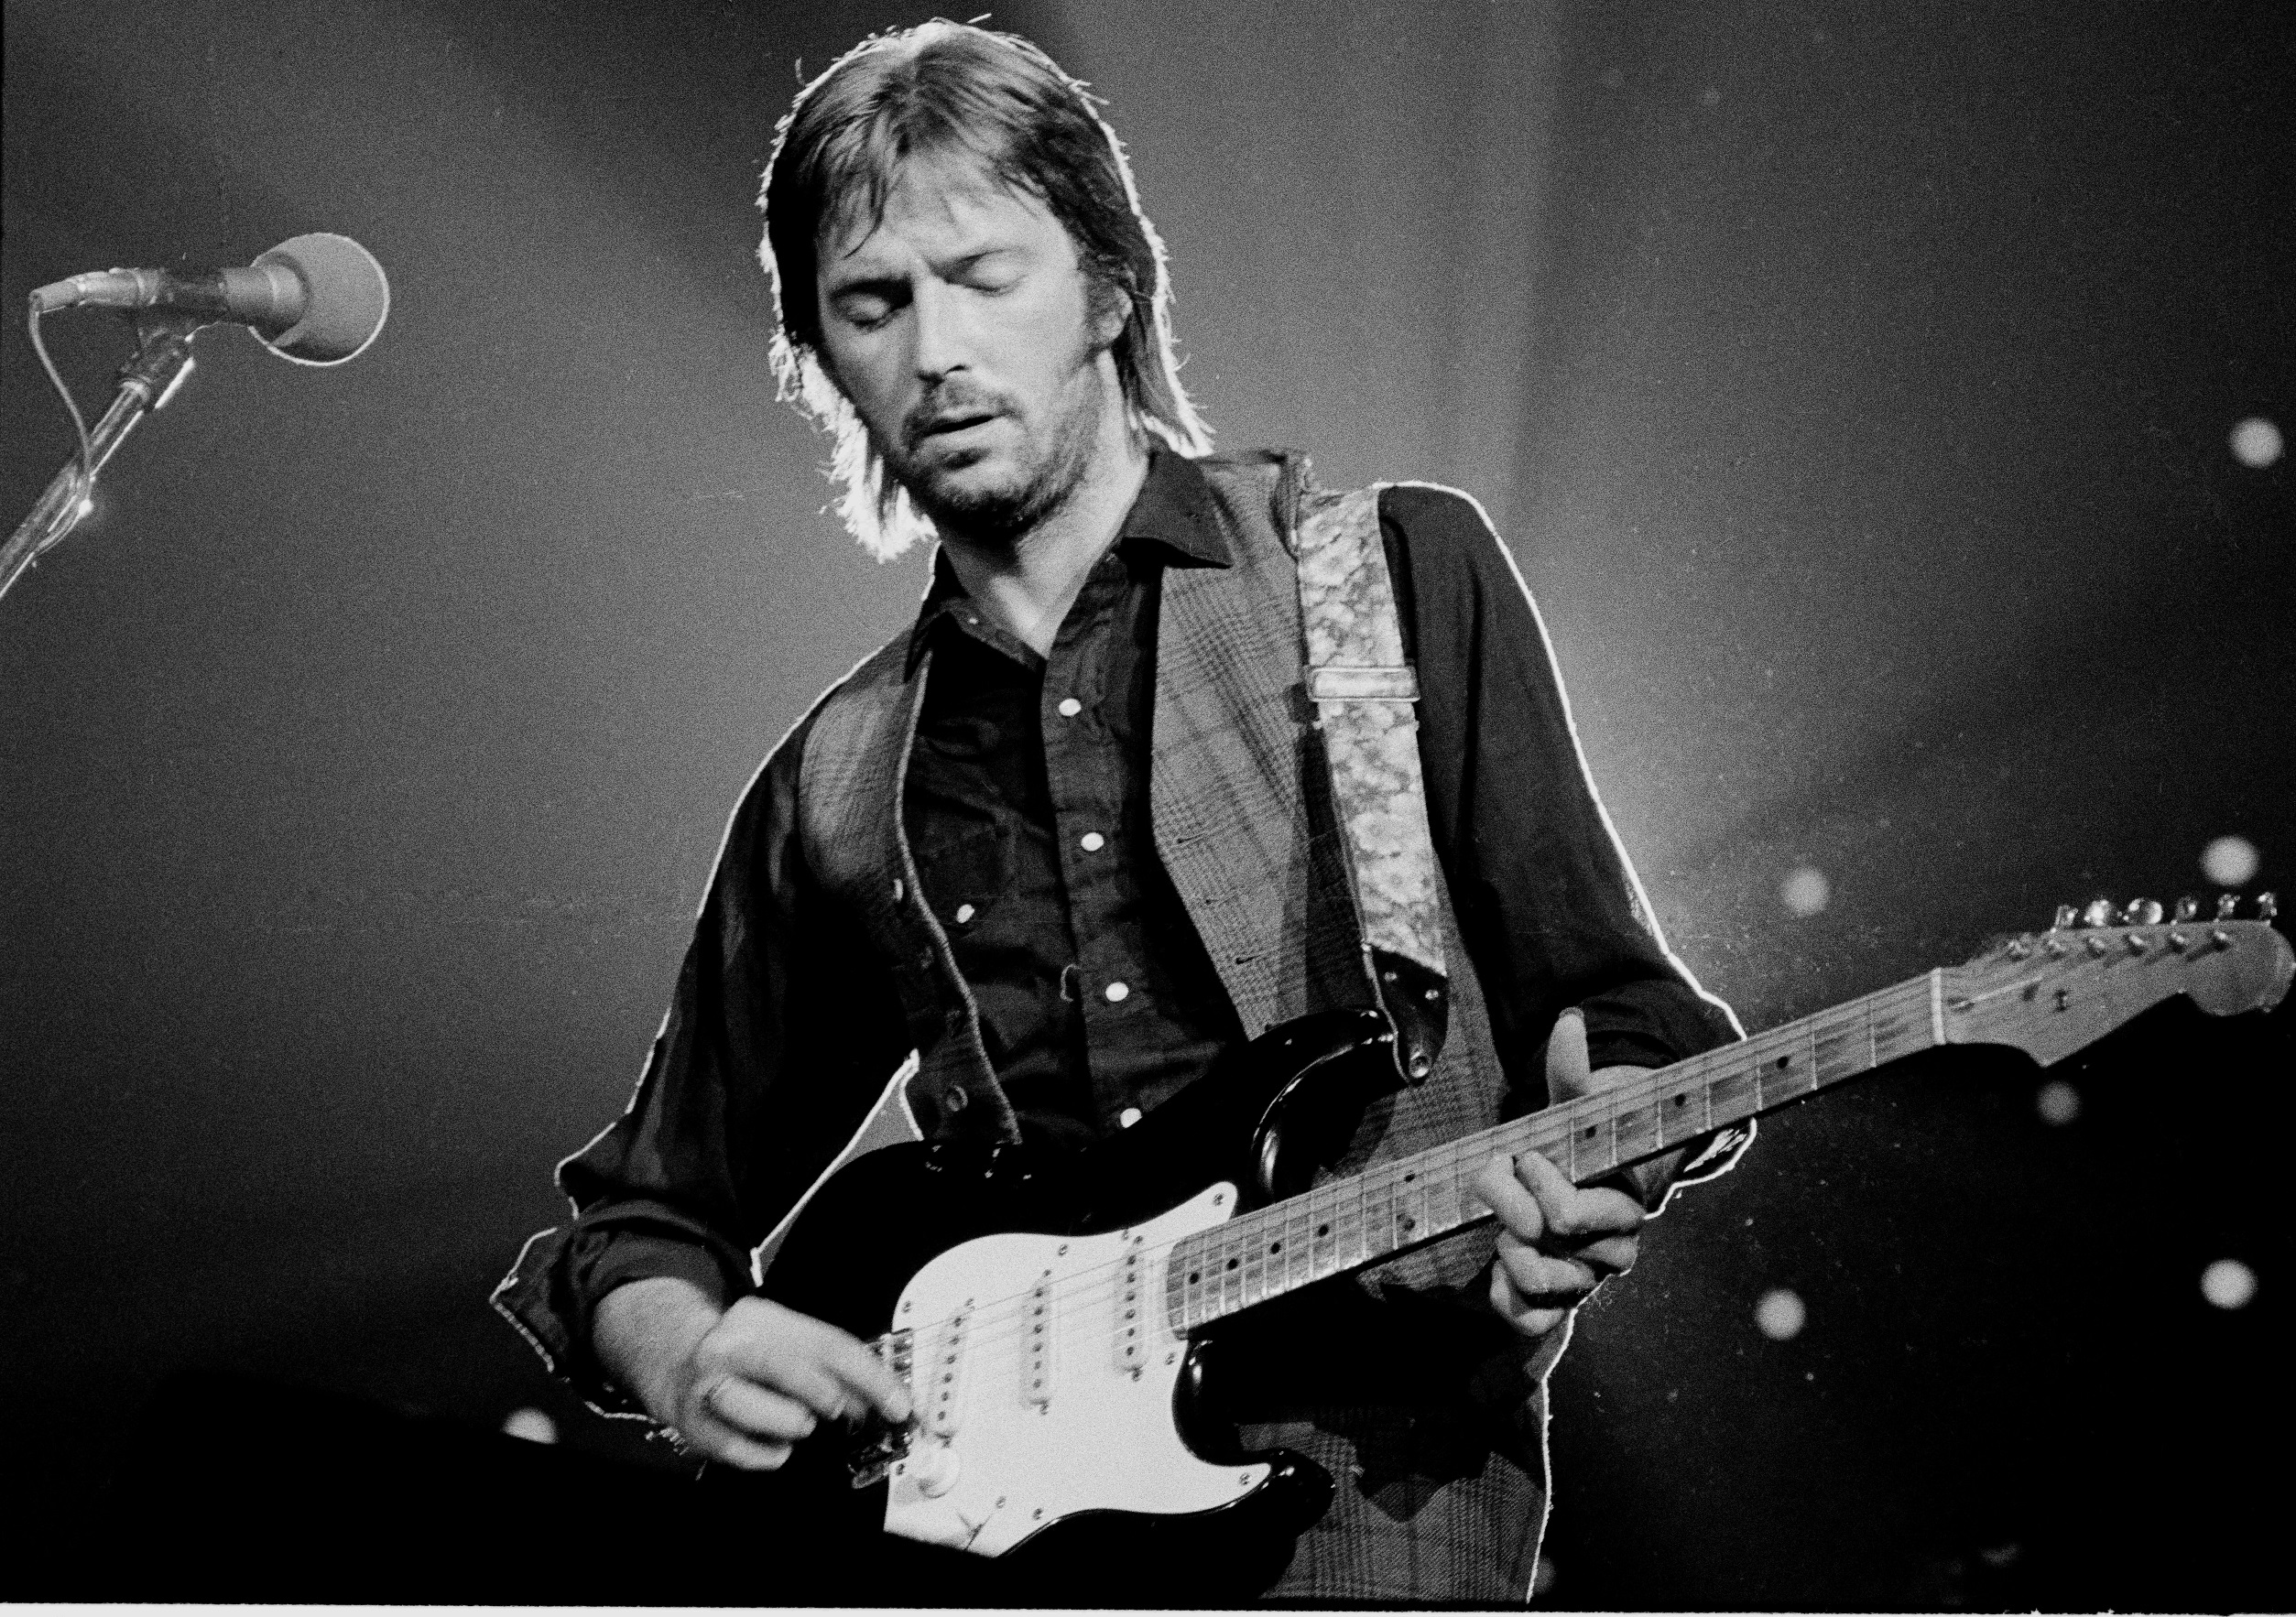 Eric Clapton playing songs on a guitar